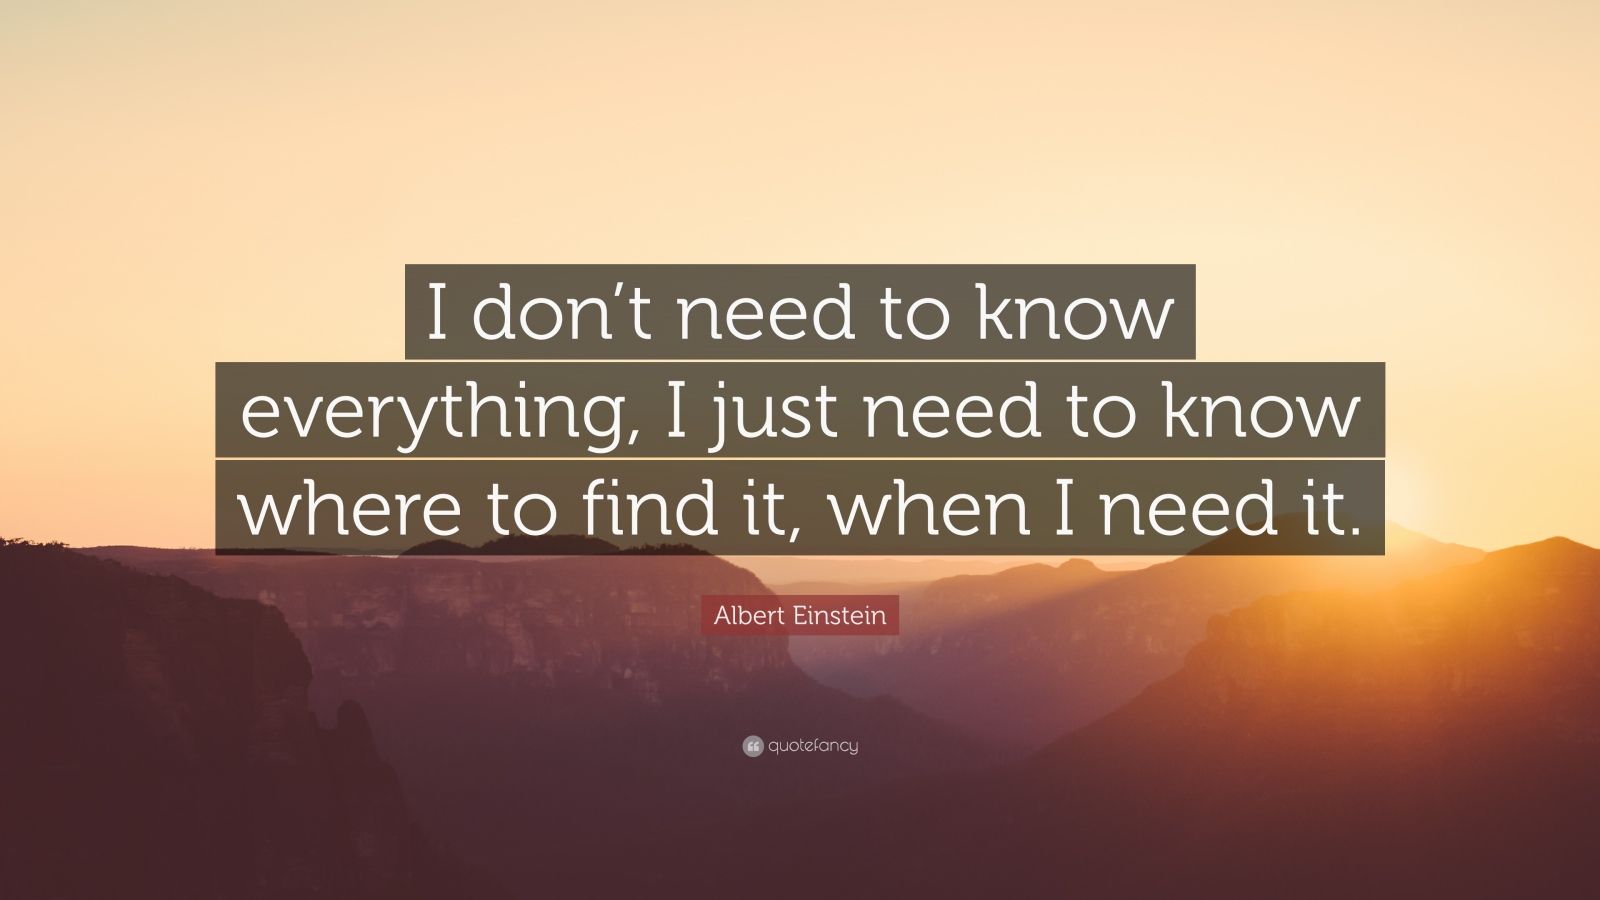 Albert Einstein Quote: “I don’t need to know everything, I just need to